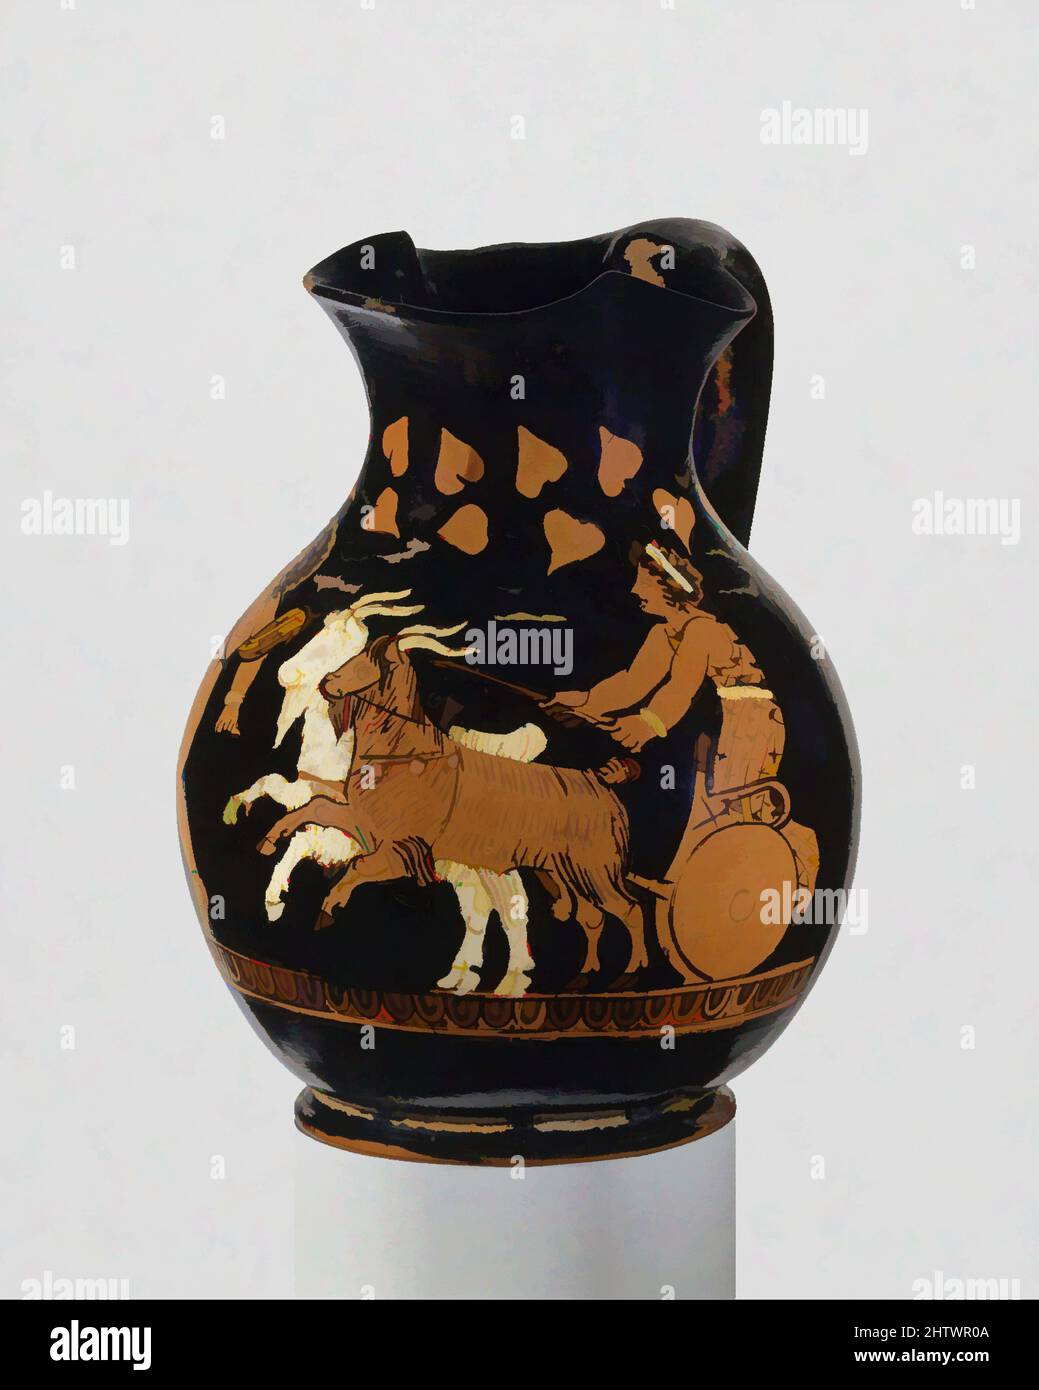 Art inspired by Terracotta oinochoe: chous (jug), Classical, ca. 400 B.C., Greek, Attic, Terracotta; red-figure, 4in. (10.2cm), Vases, Boy driving goat-drawn chariot preceded by boy with chous. The representation, with the lively animals and polychromy, is particularly engaging, Classic works modernized by Artotop with a splash of modernity. Shapes, color and value, eye-catching visual impact on art. Emotions through freedom of artworks in a contemporary way. A timeless message pursuing a wildly creative new direction. Artists turning to the digital medium and creating the Artotop NFT Stock Photo